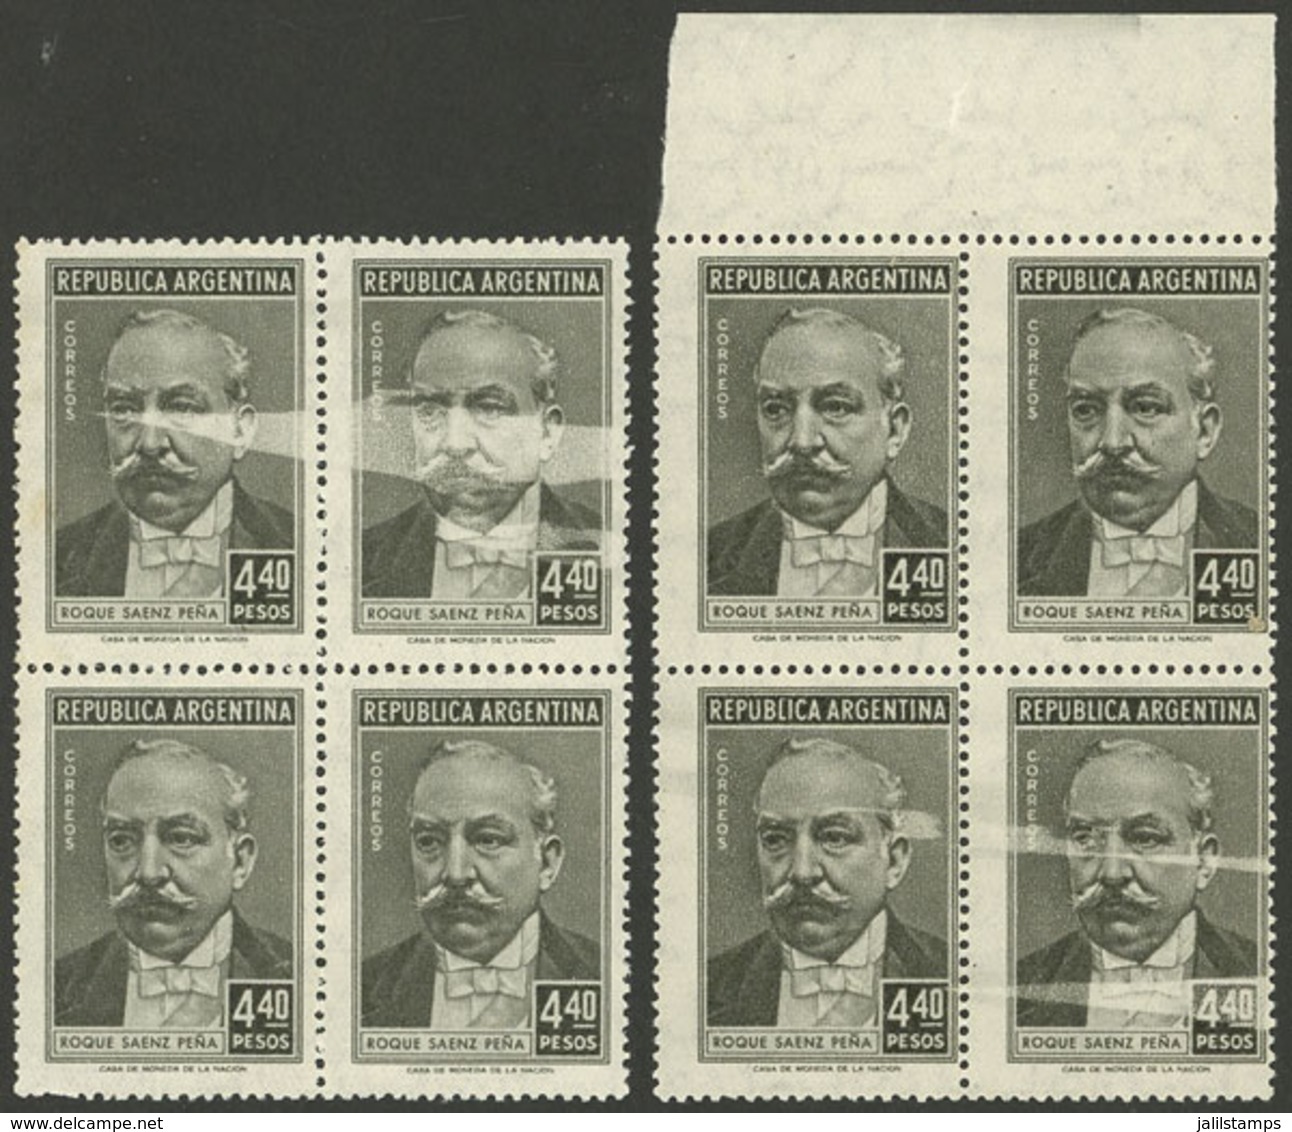 ARGENTINA: GJ.1051P, 4.40P. Saenz Peña, 2 Blocks Of 4 With Notable Spots Produced In The Printing Process, VF! - Ungebraucht